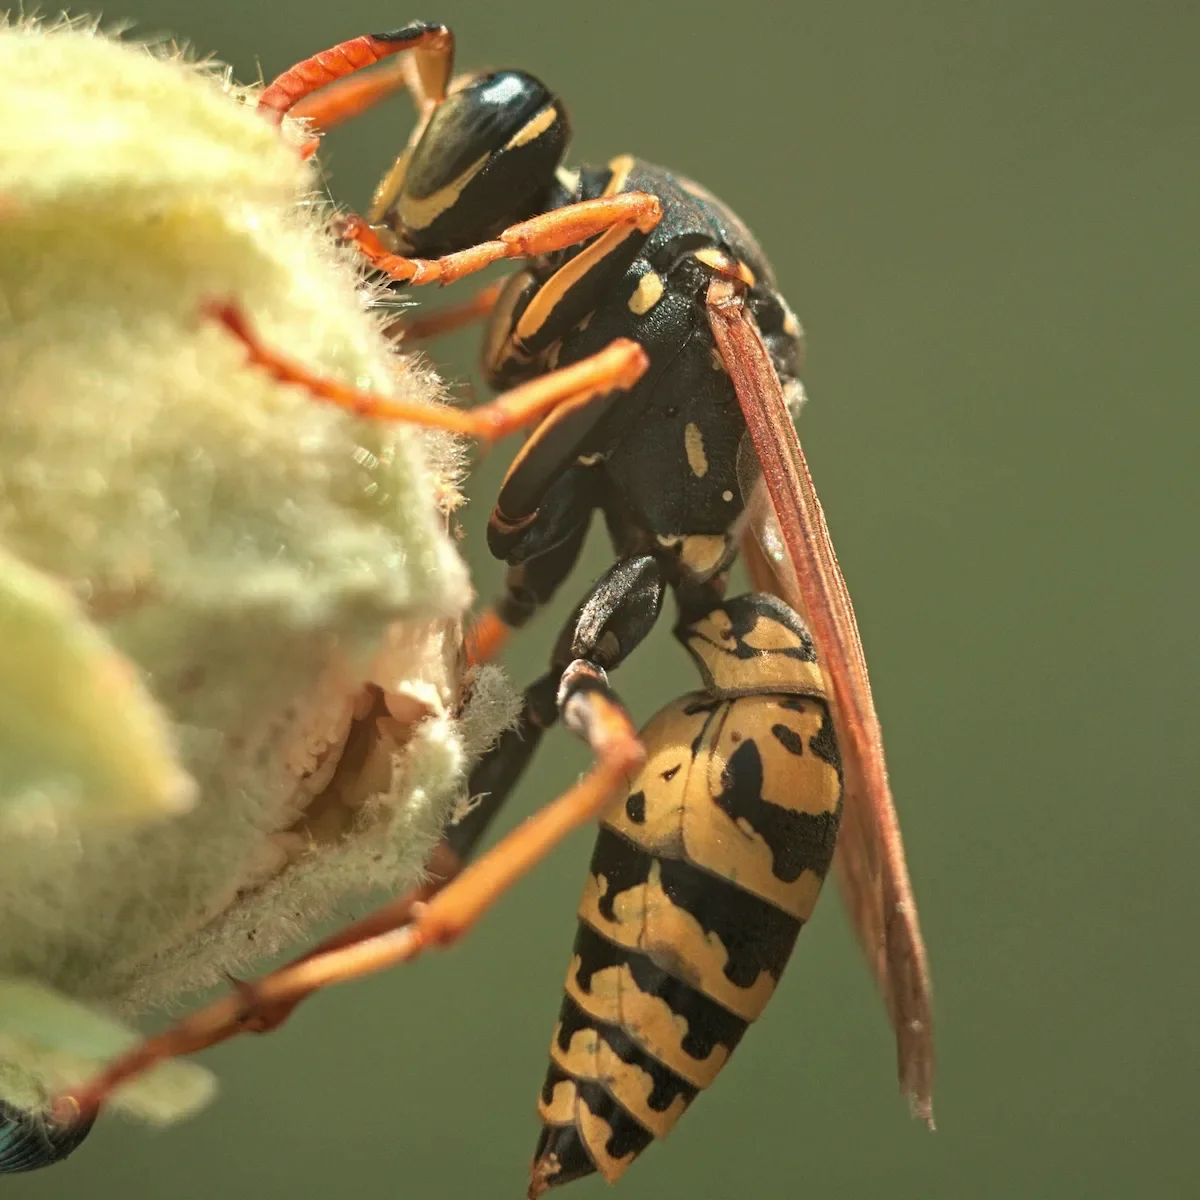 Identifying Common Stinging Insects Bees, Wasps, and Hornets